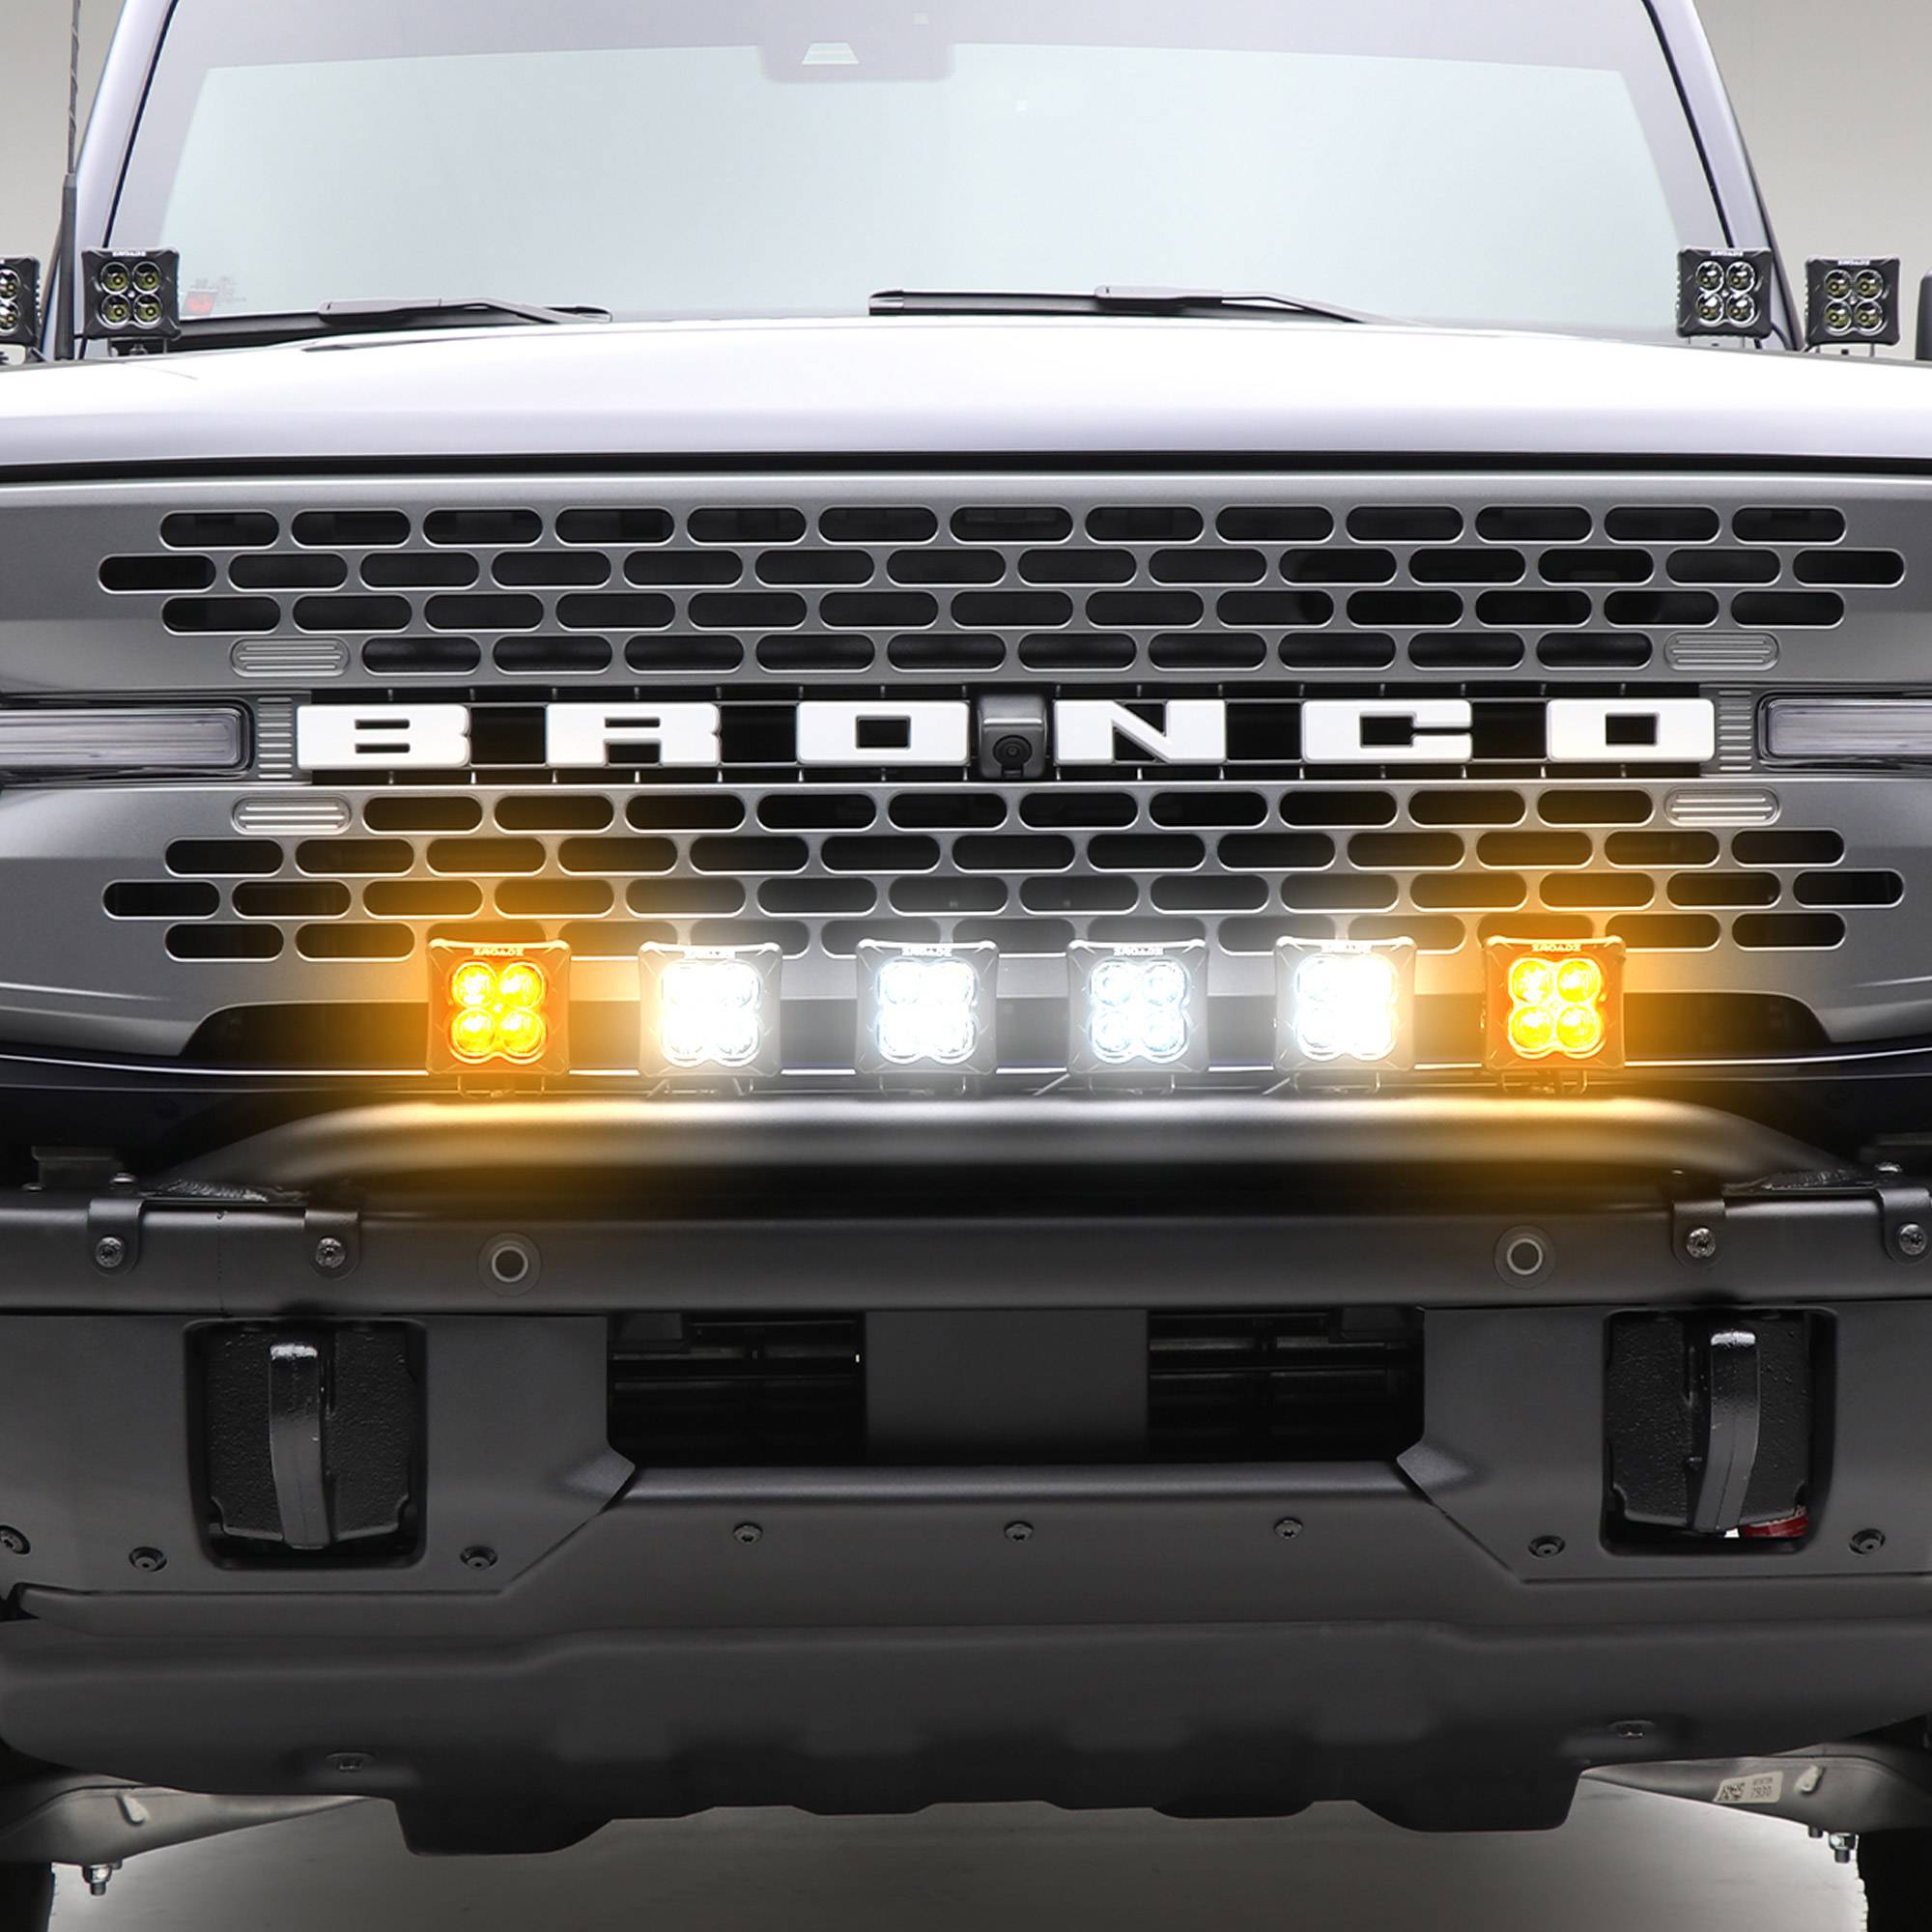 ZROADZ OFF ROAD PRODUCTS - 2021-2022 Ford Bronco Front Bumper Top LED KIT, Includes (4) 3 inch ZROADZ White and (2) 3 inch Amber LED Light Pods - Part # Z325431-KITAW